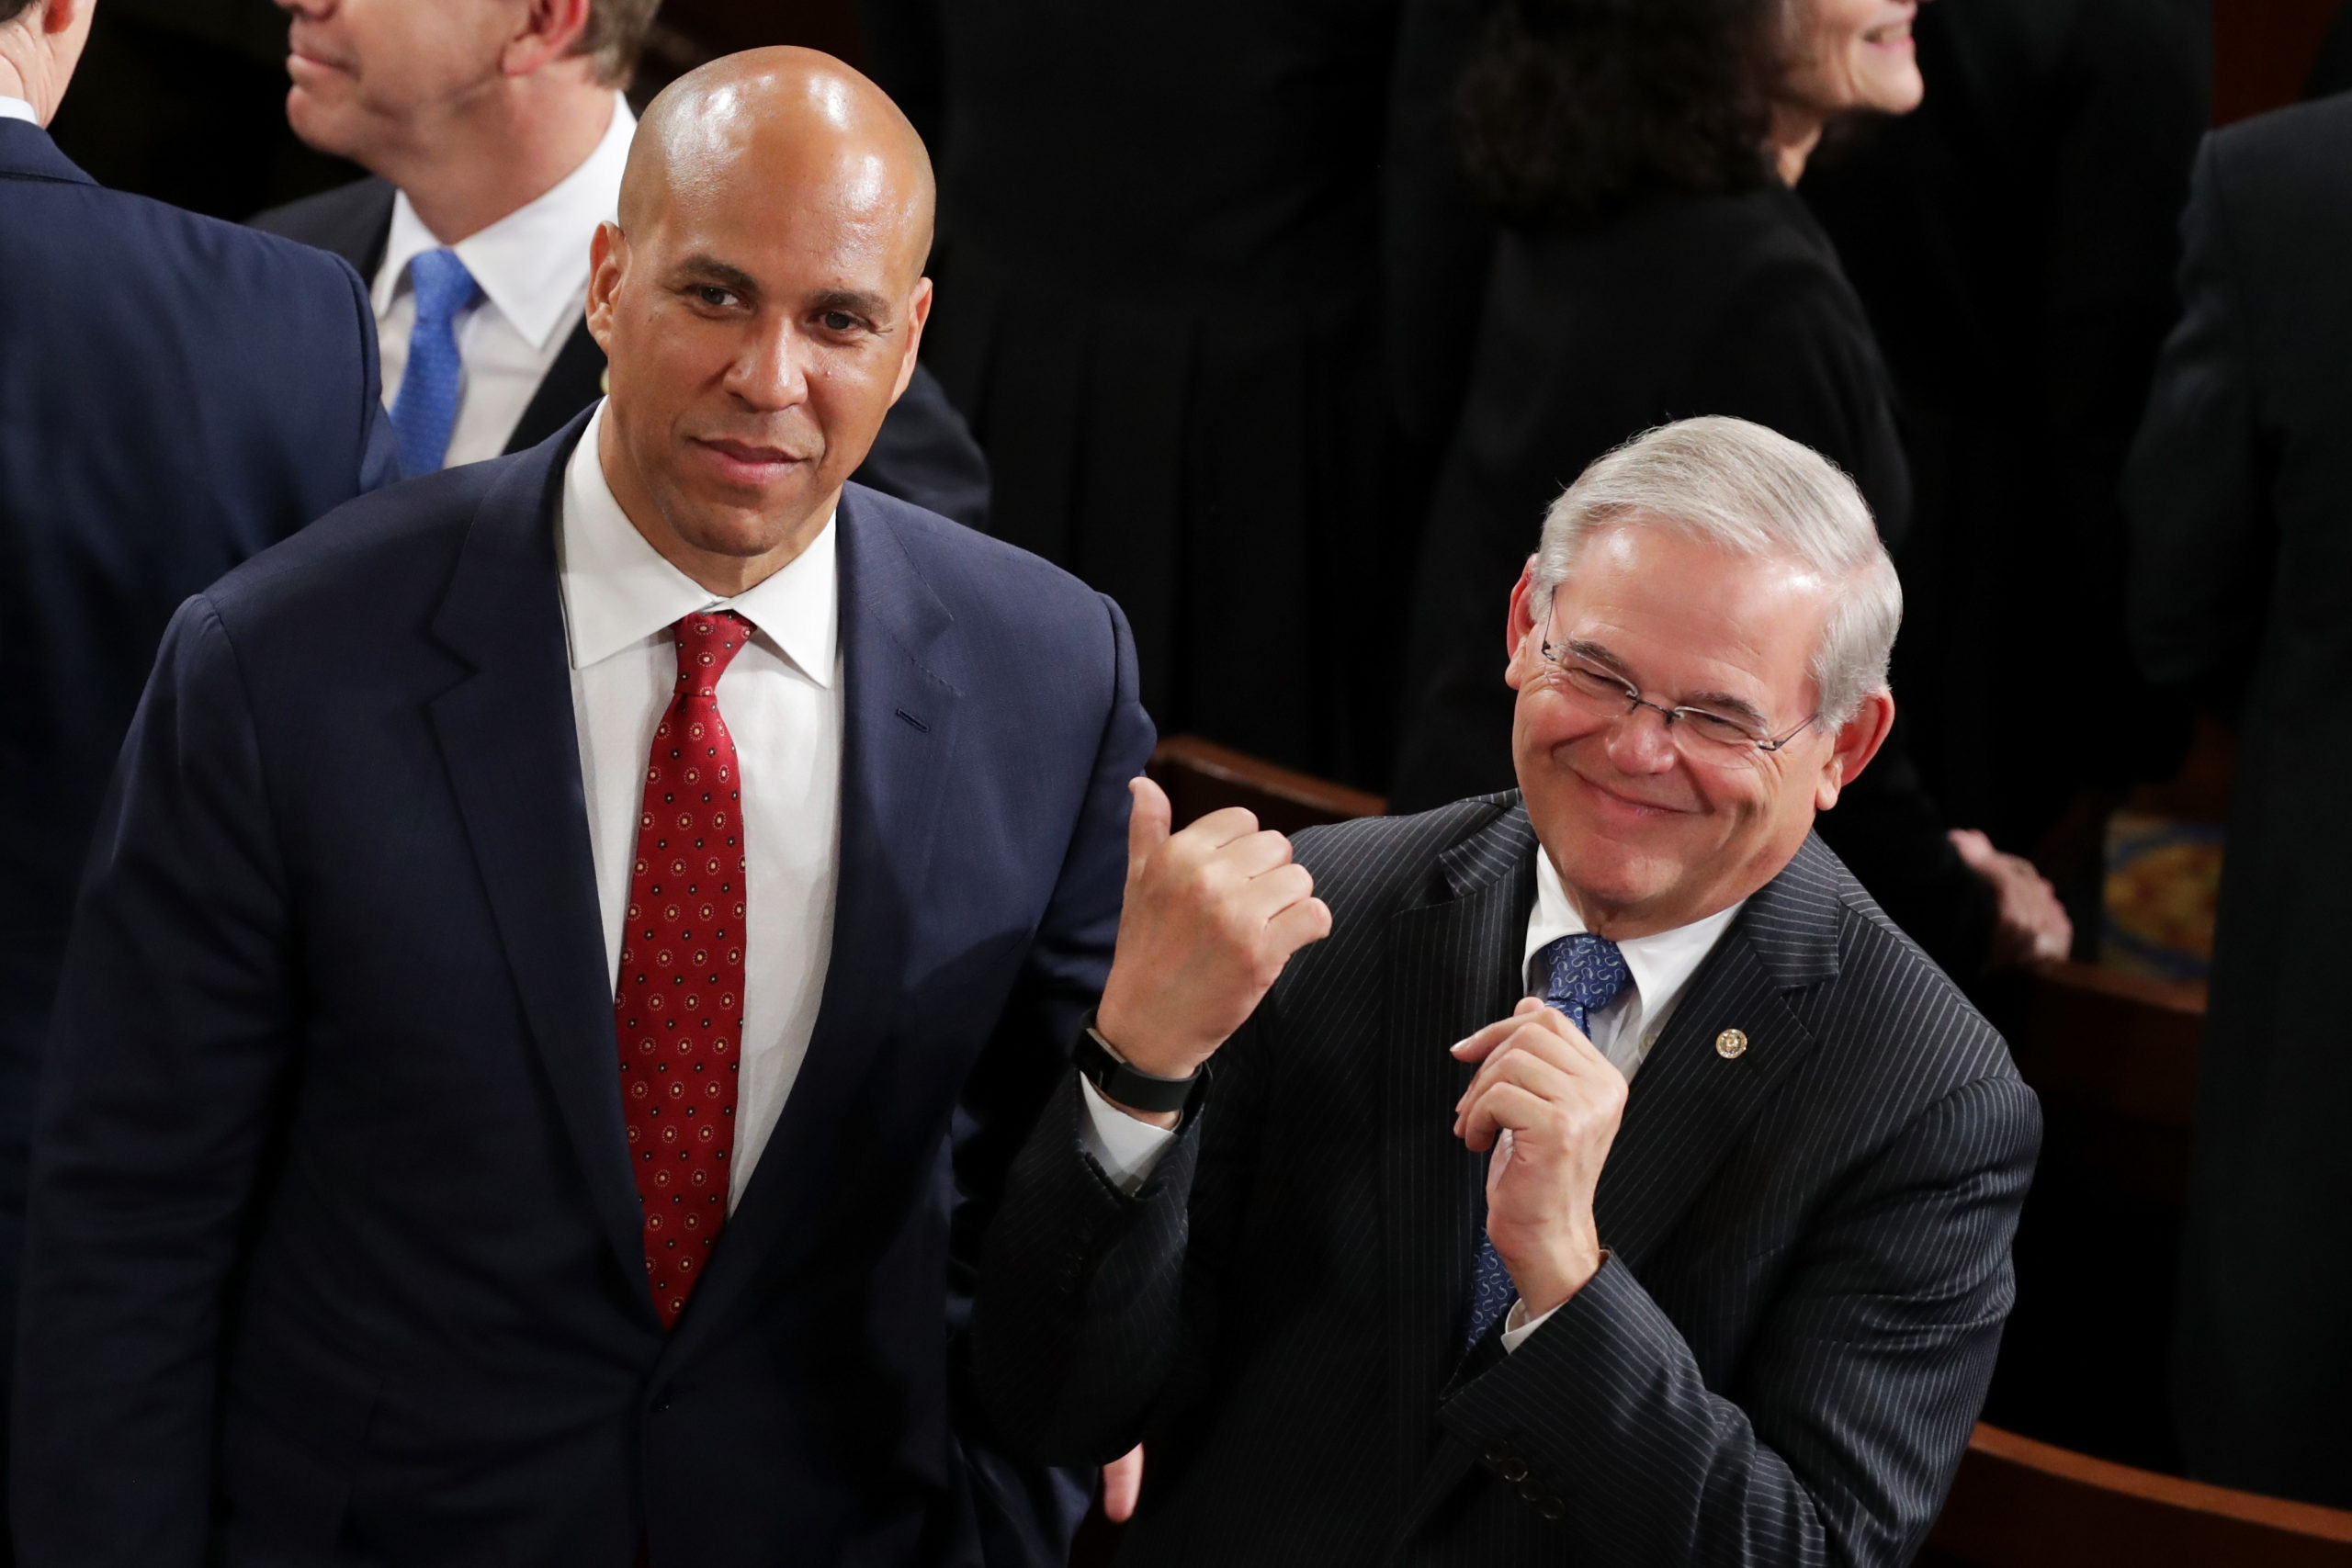 WASHINGTON, DC - FEBRUARY 28: Sen. Cory Booker (D-NJ) and Sen. Bob Menendez (D-NJ) arrive to a joint session of the U.S. Congress with U.S. President Donald Trump on February 28, 2017 in the House chamber of the U.S. Capitol in Washington, DC. (Photo by Chip Somodevilla/Getty Images)